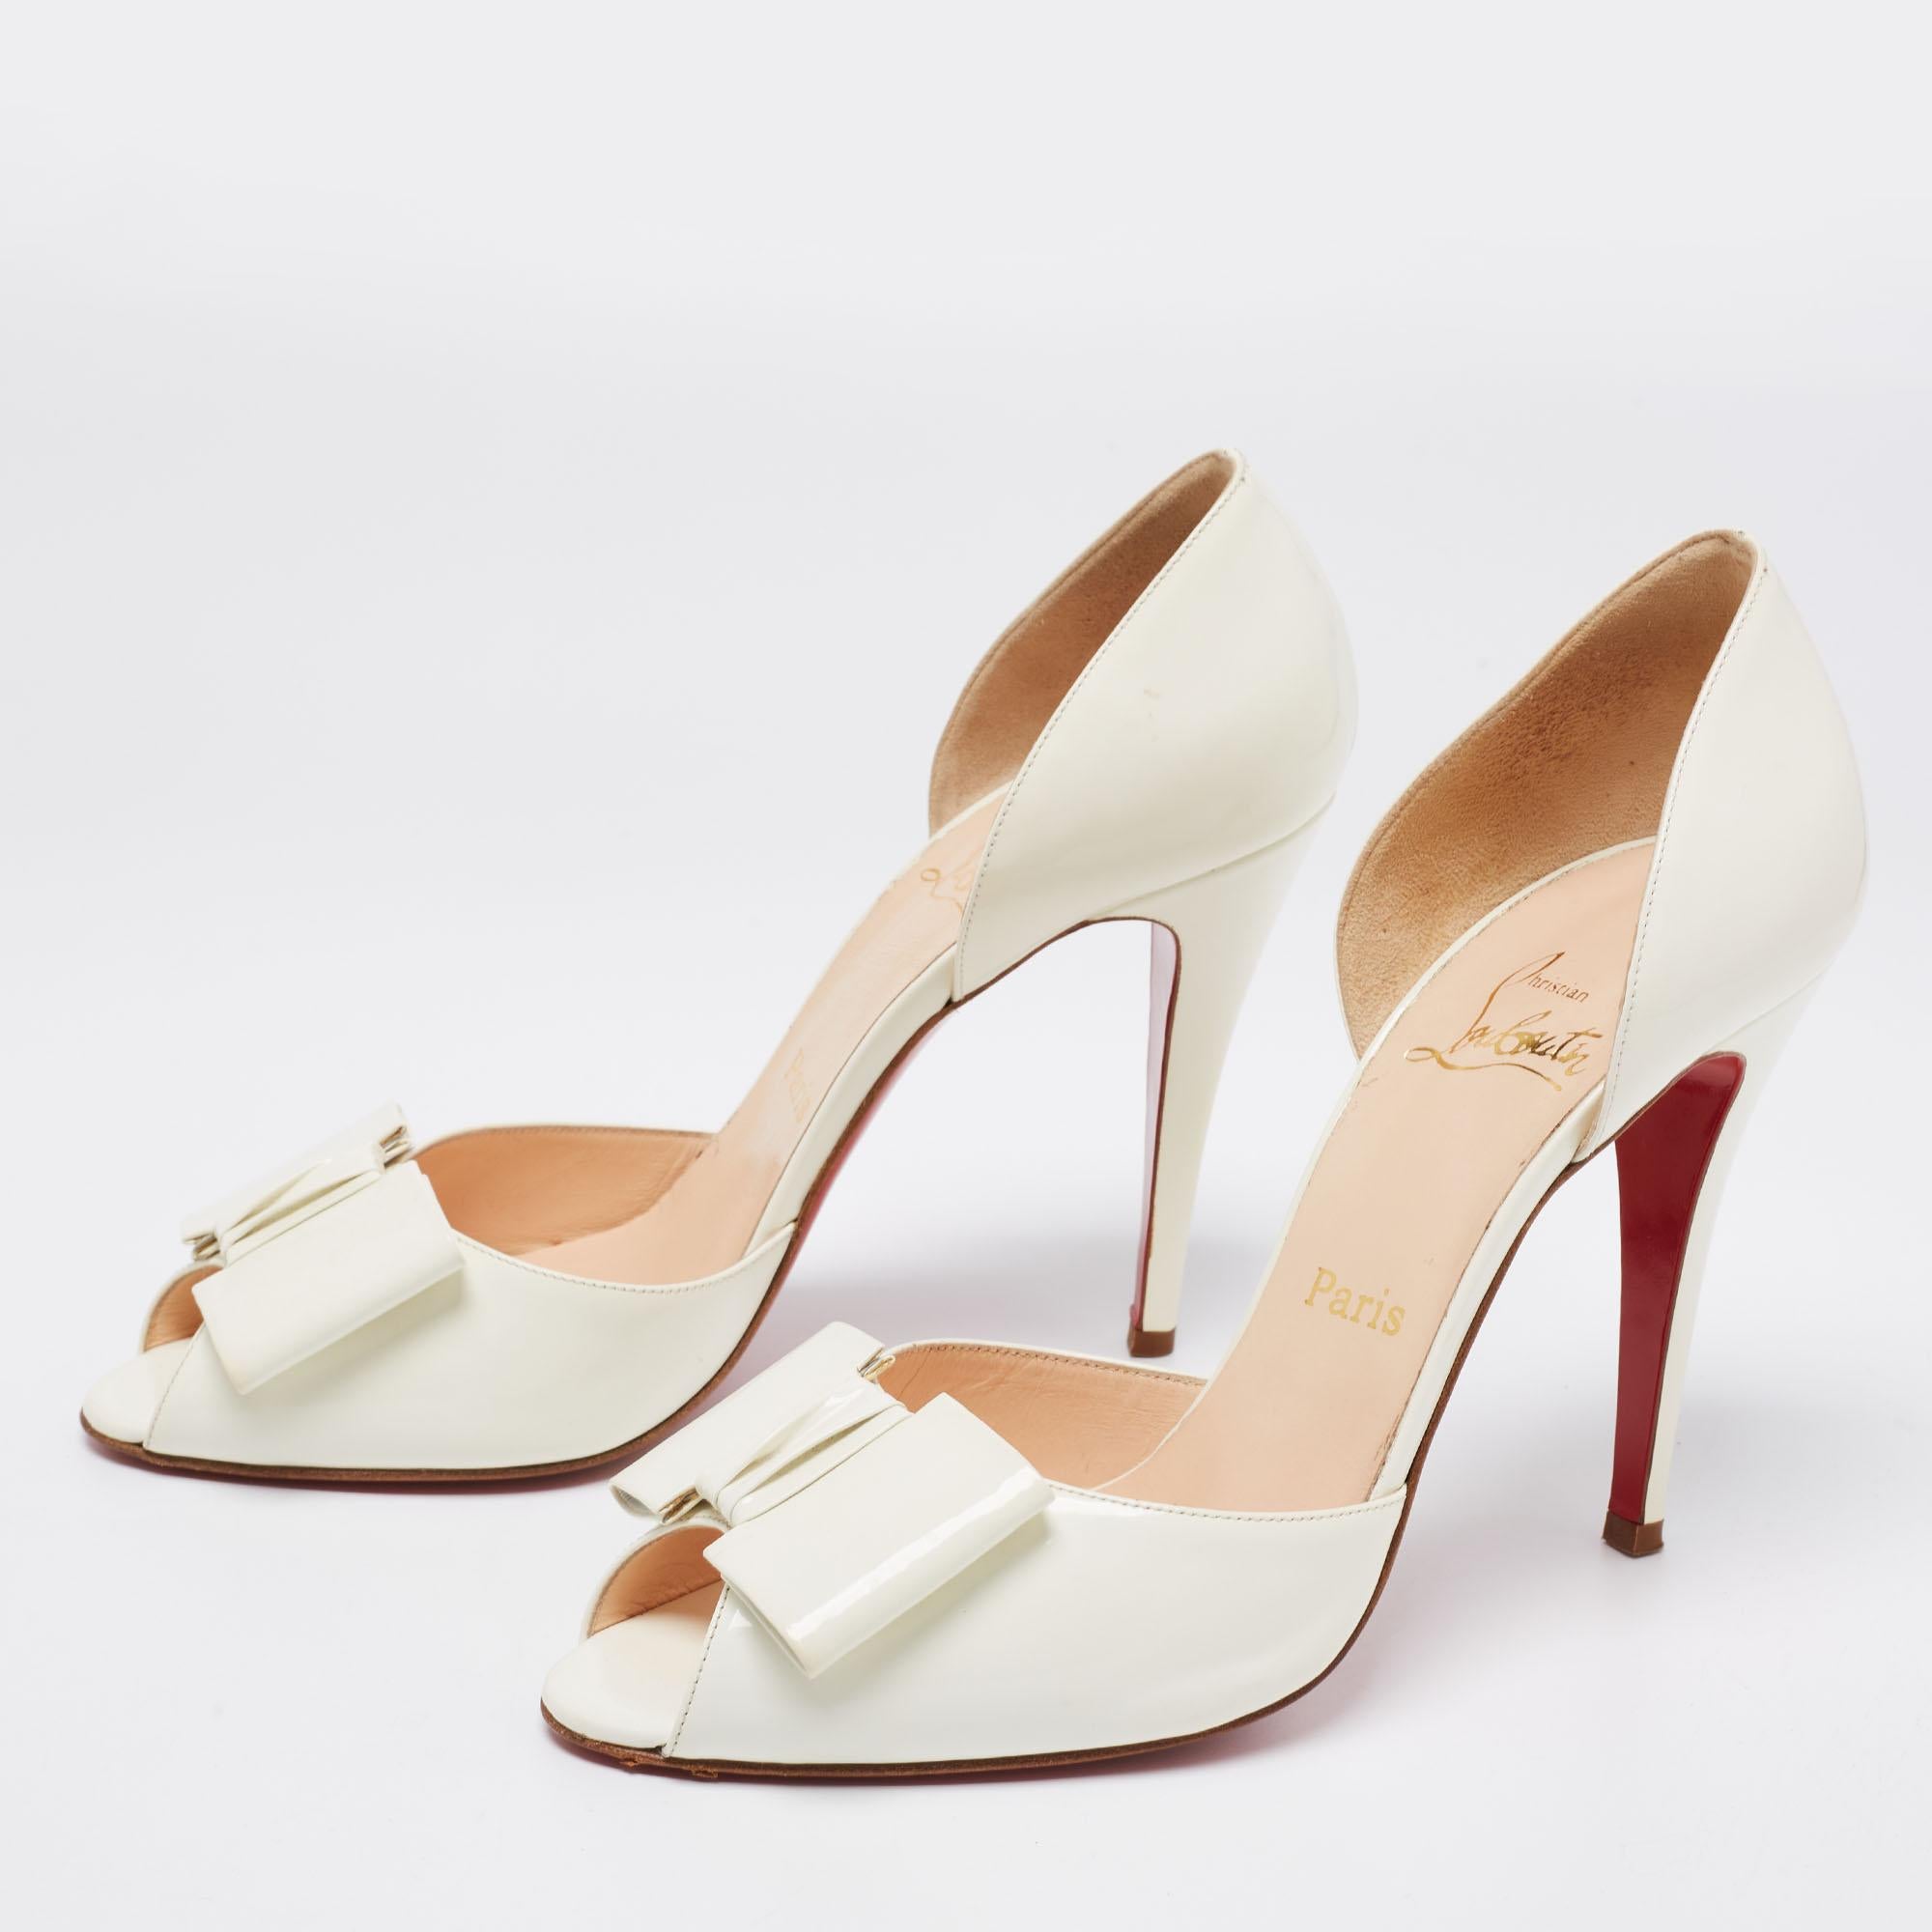 Christian Louboutin’s professed goal has been to make a woman look chic and stunning with their shoes. These patent leather pumps with bow adornment on the vamps are a perfect addition to your wardrobe for that alluring look.